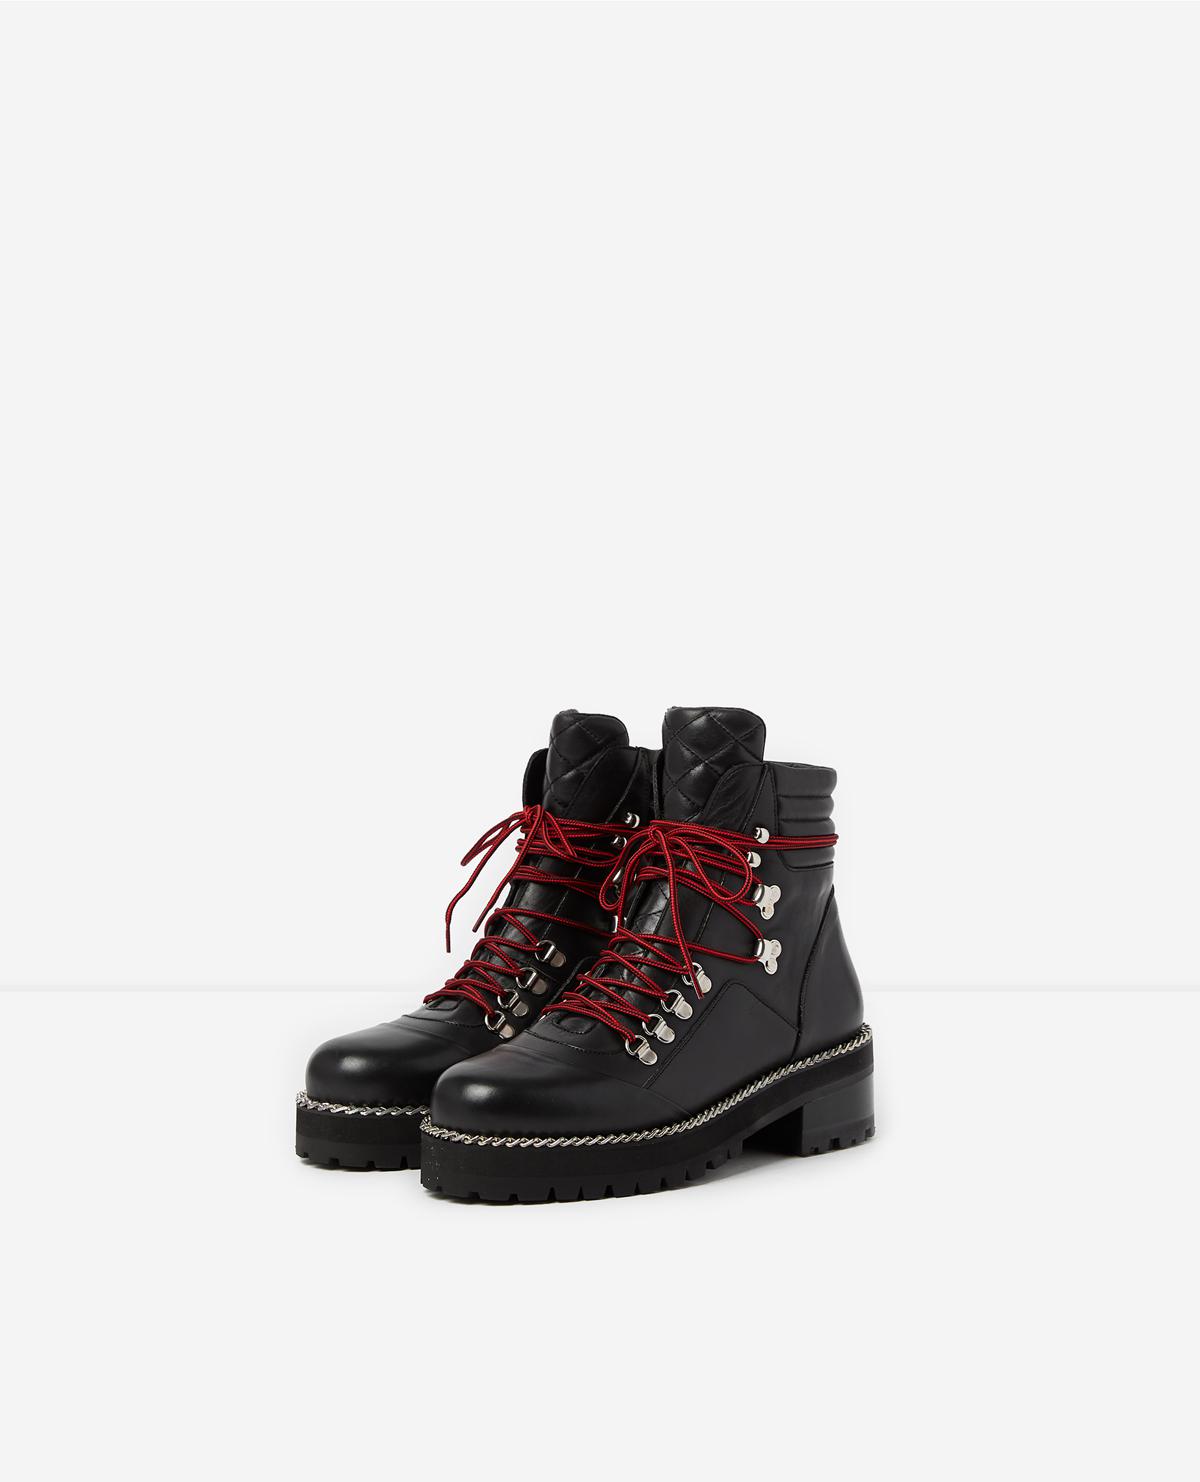 The Kooples Leather Snow Boots in Black 